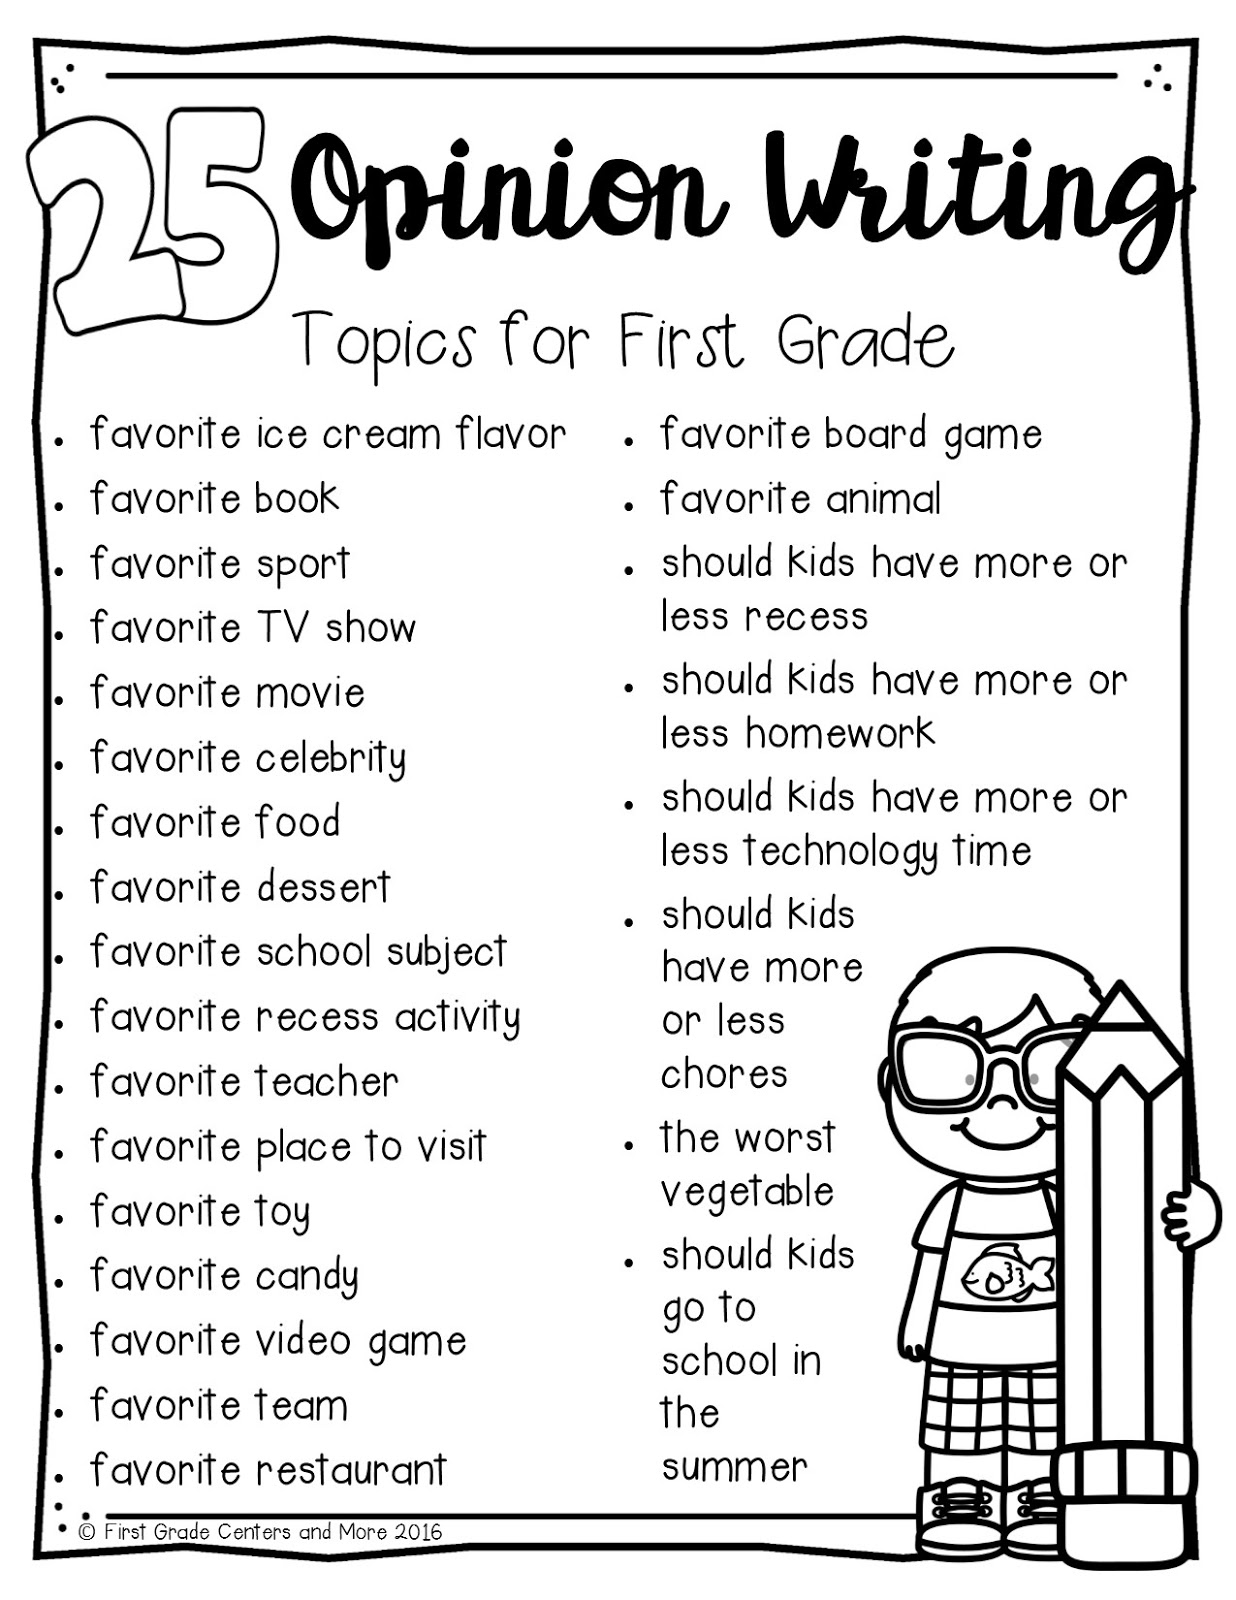 Opinion essay topics for kids